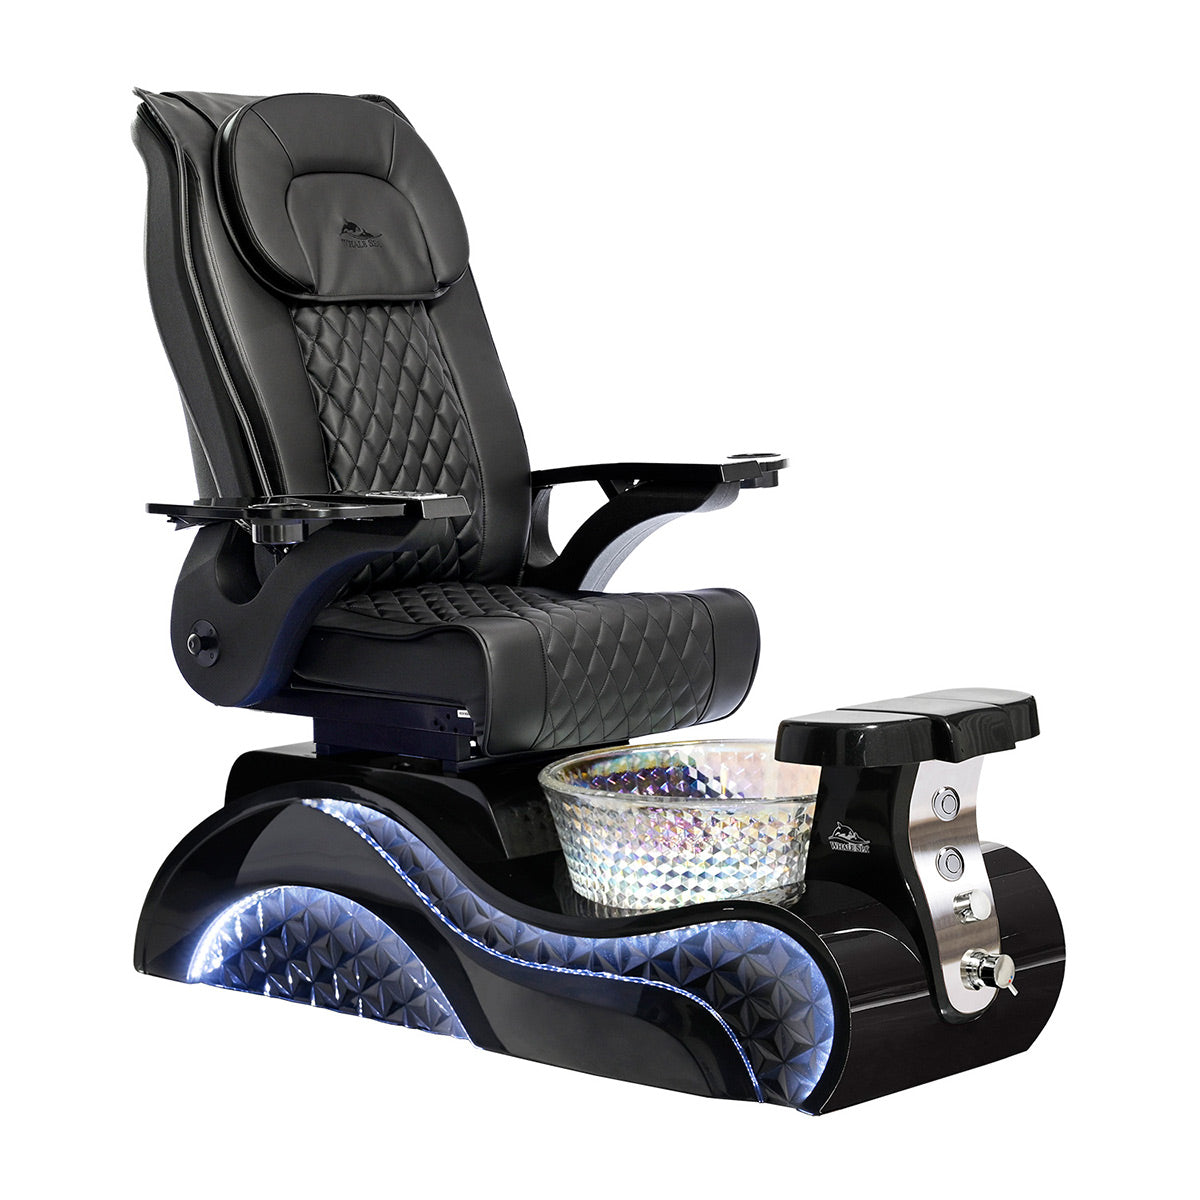 Lucent II Pedicure Chair - Black